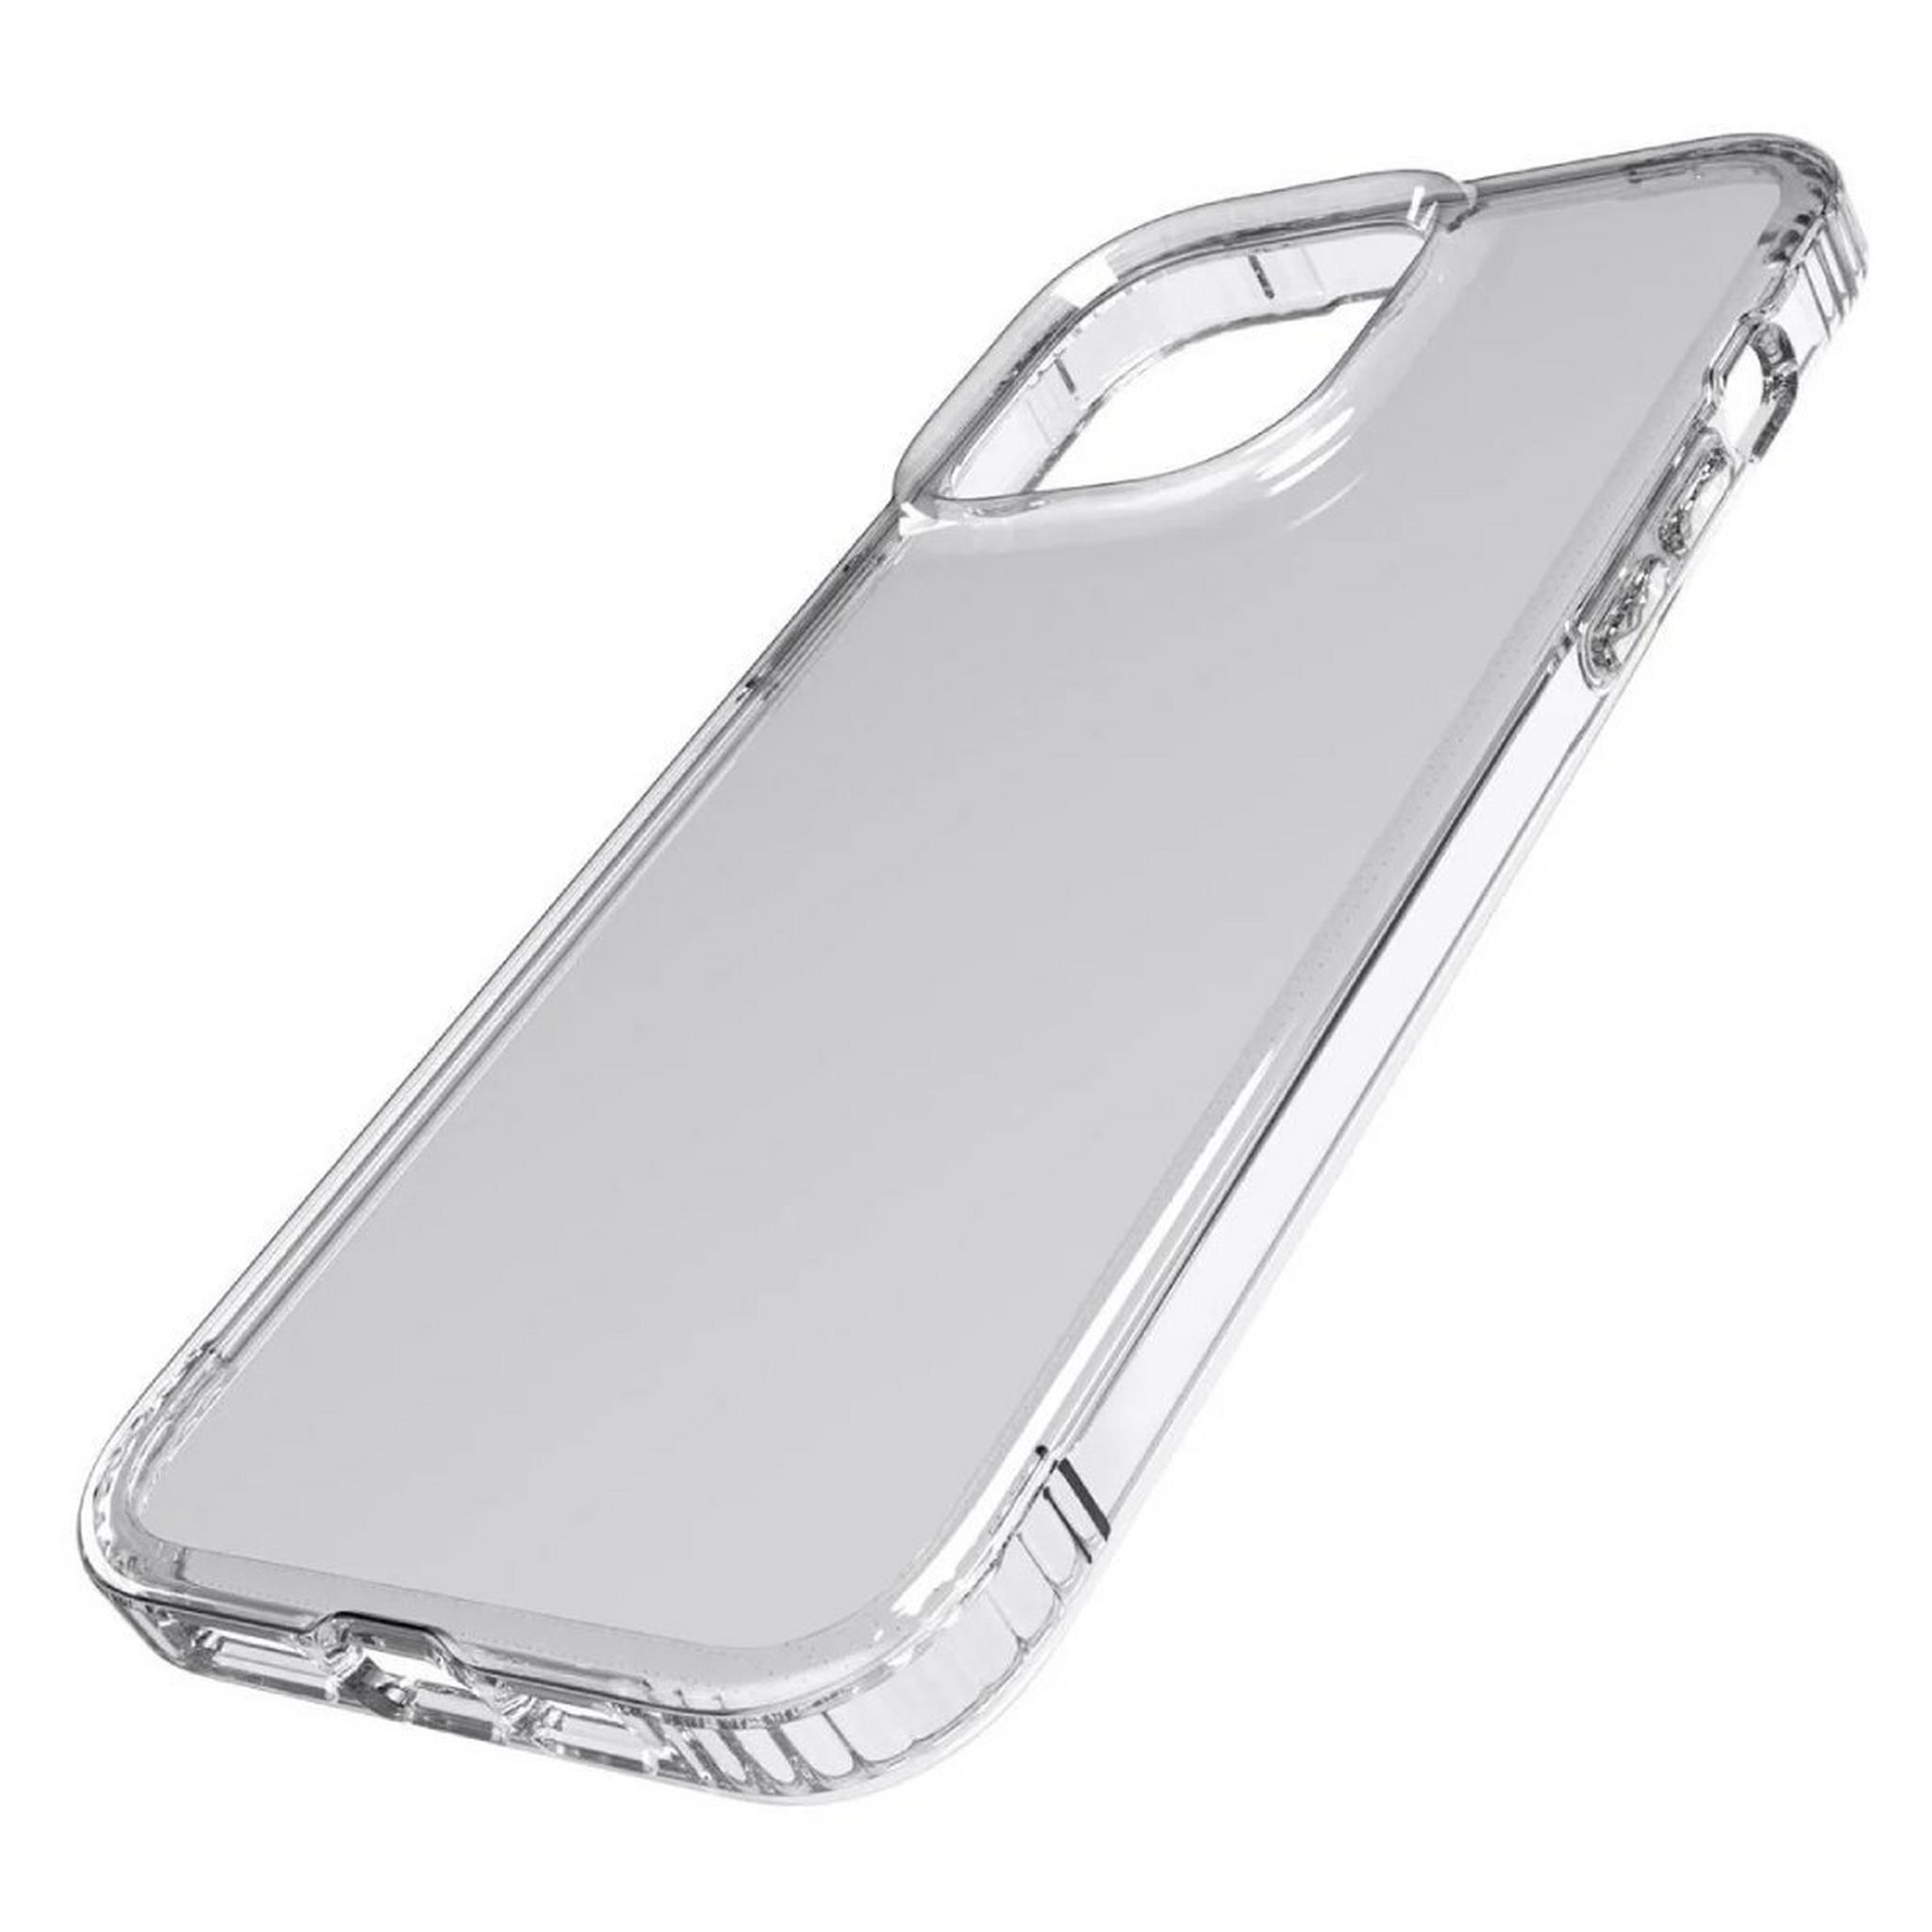 Tech21 EvoClear iPhone 14 Pro Max Case (Clear)